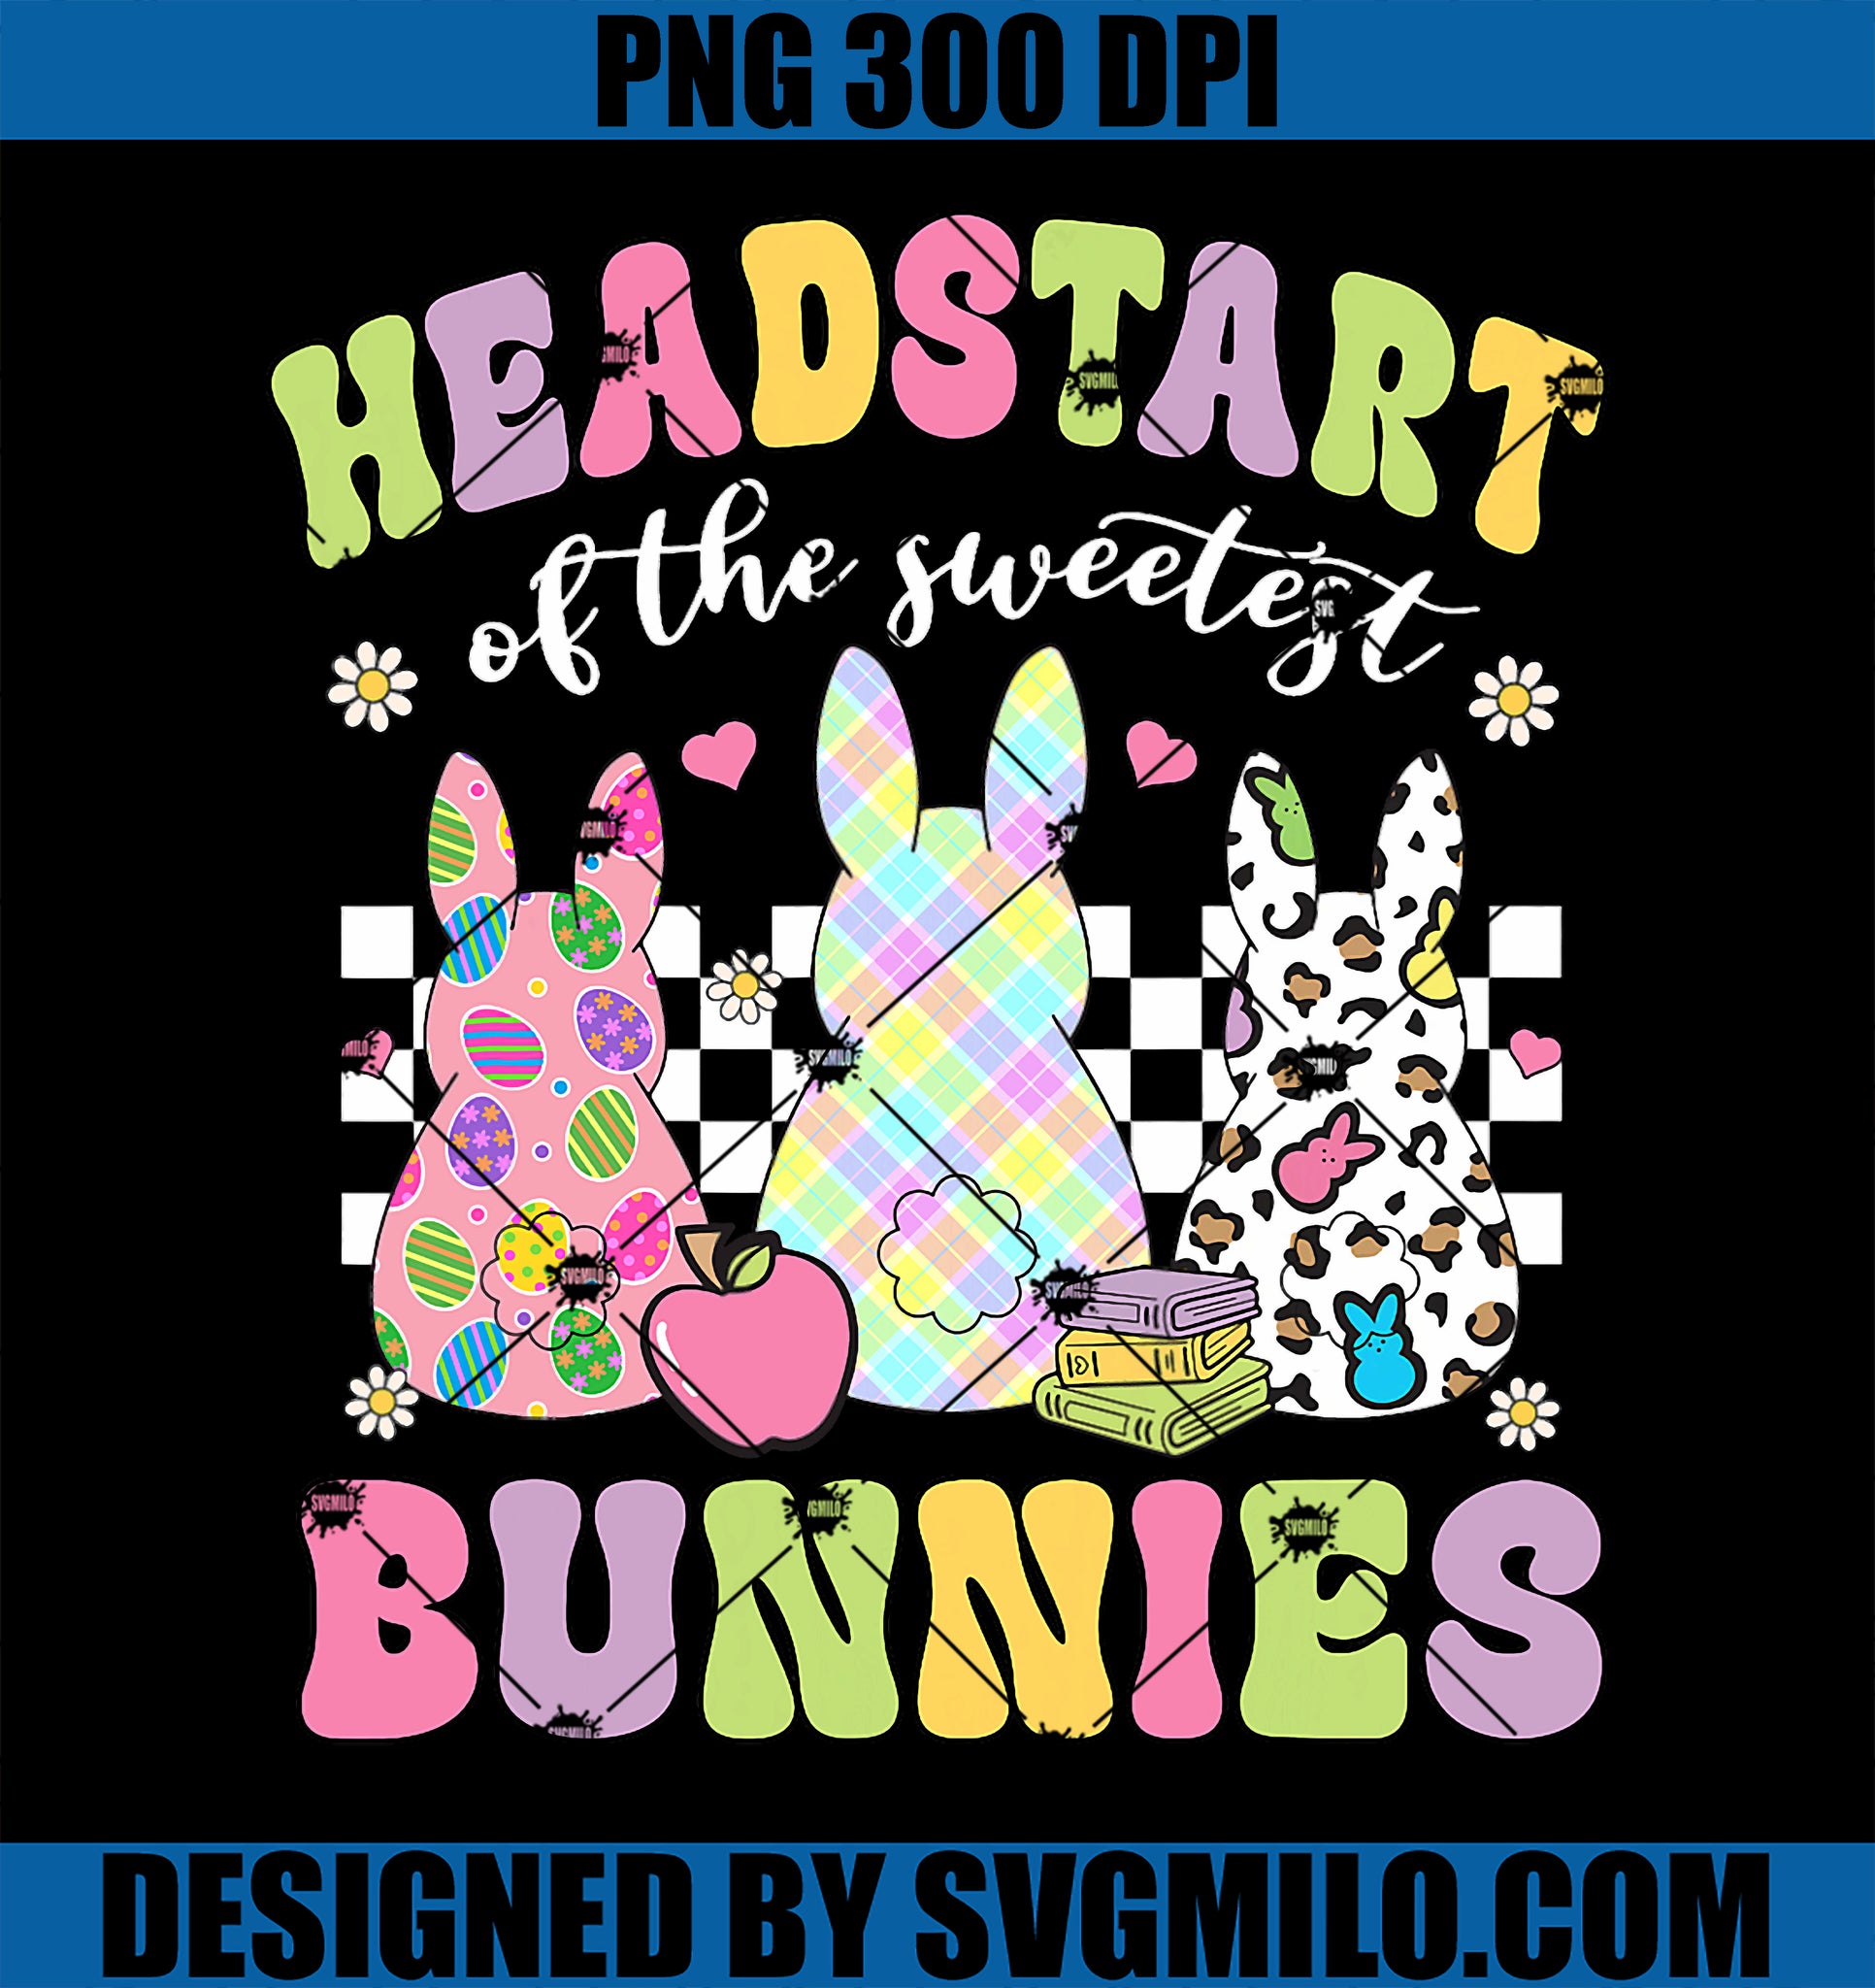 Headstart Of The Sweetest Bunnies Leopard PNG, Bunny Funny Easter PNG